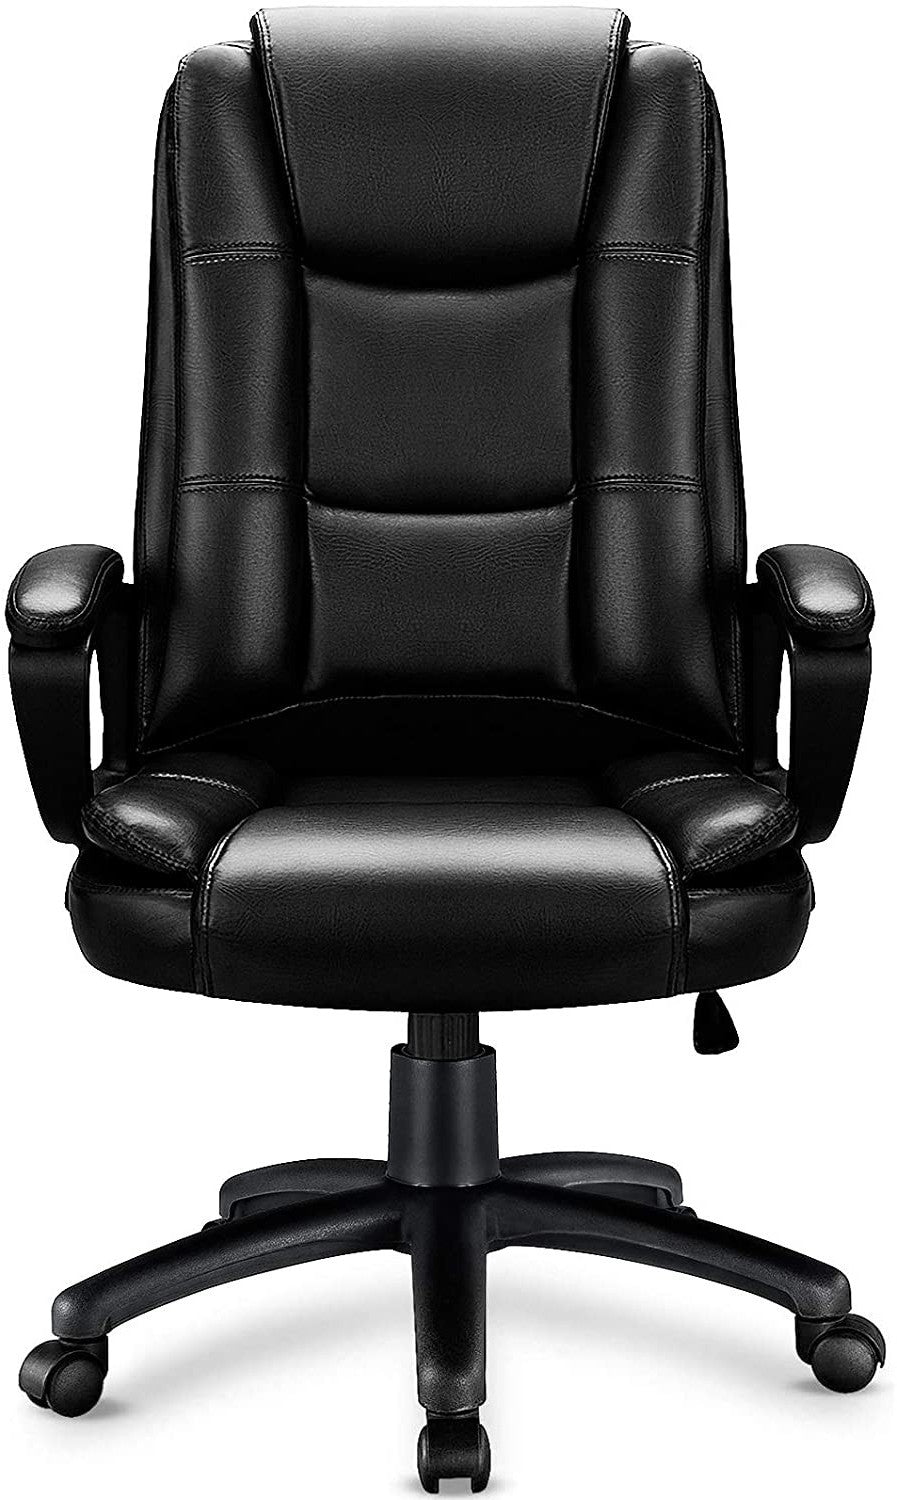 Black Faux Leather Seat Adjustable Executive Chair Metal Back Steel Frame - Tuesday Morning-Office Chairs